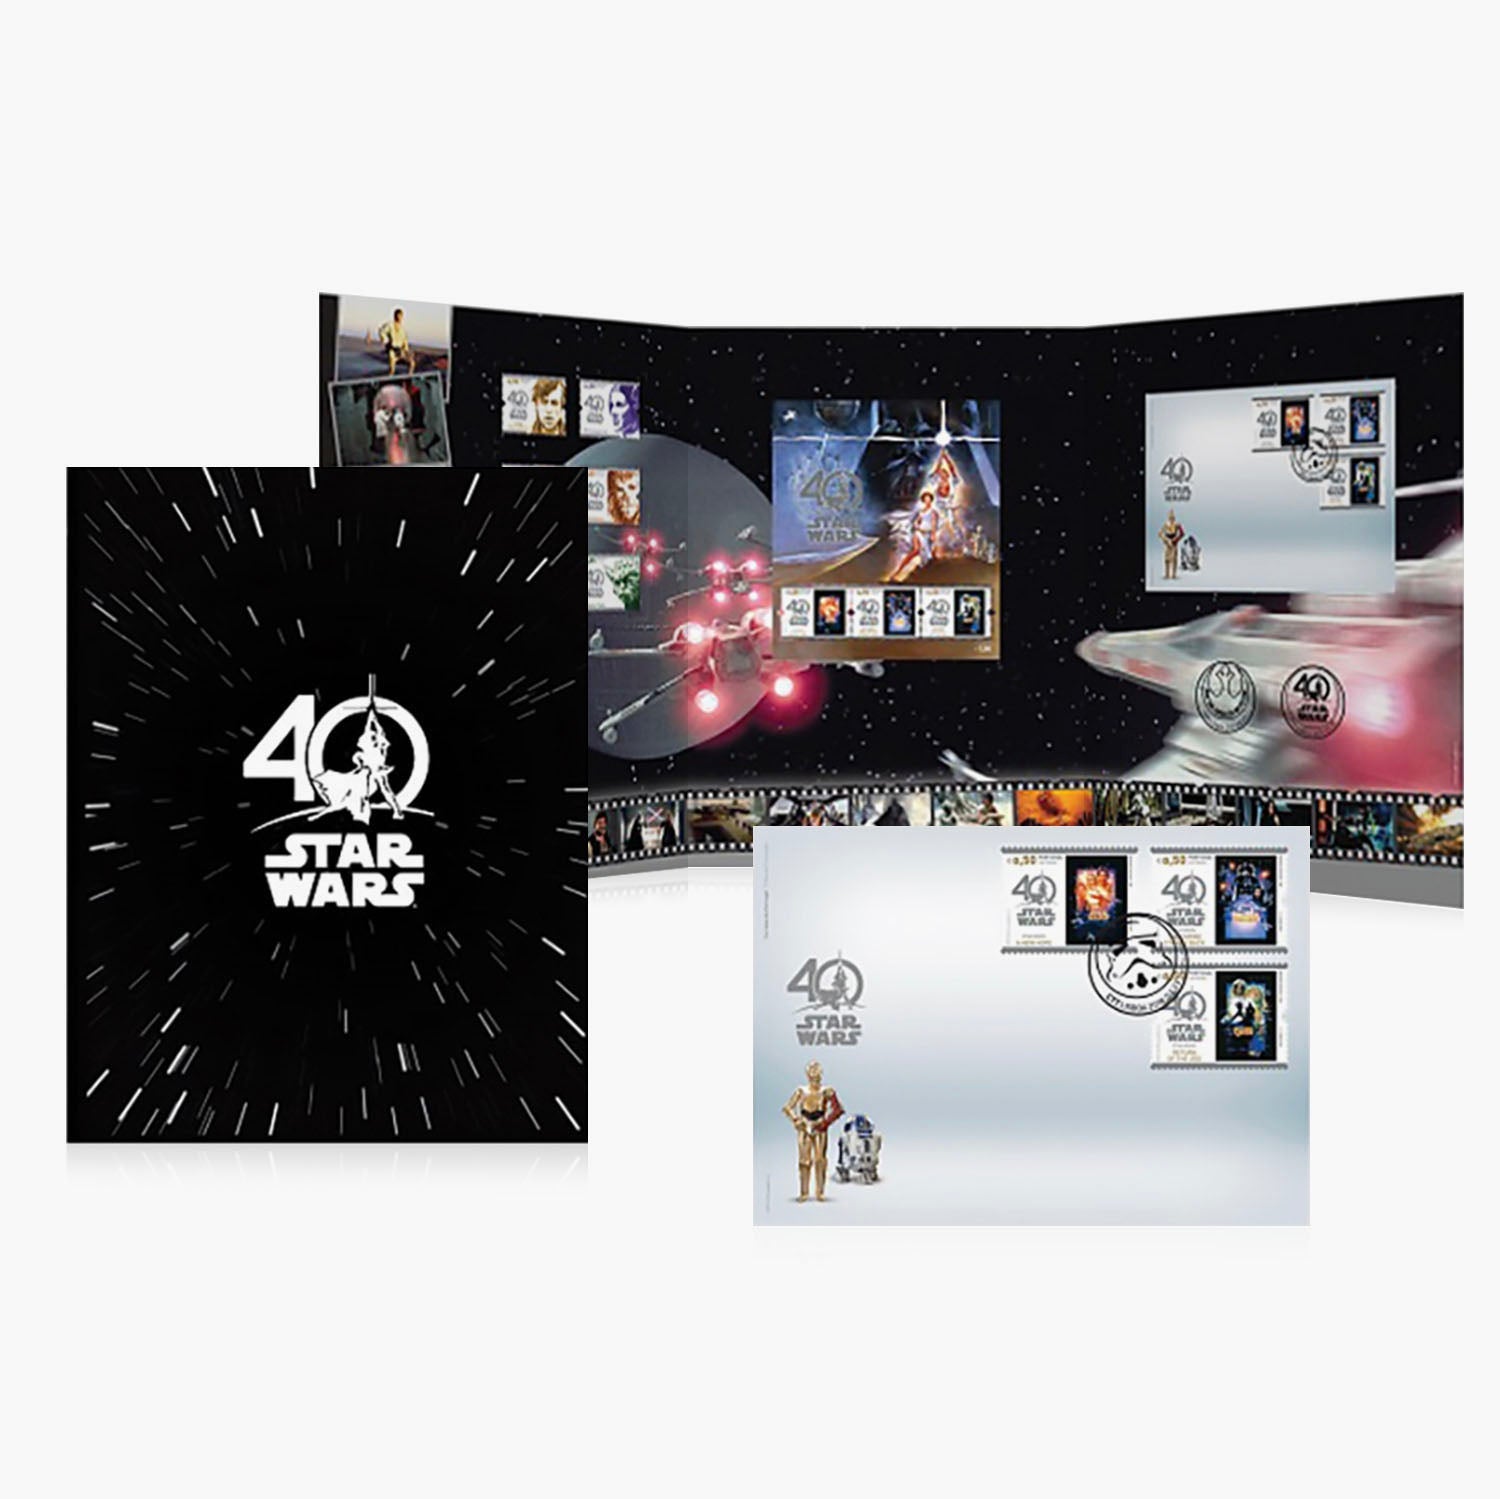 The Star Wars Anniversary Solid Silver Coin and Stamp Bundle